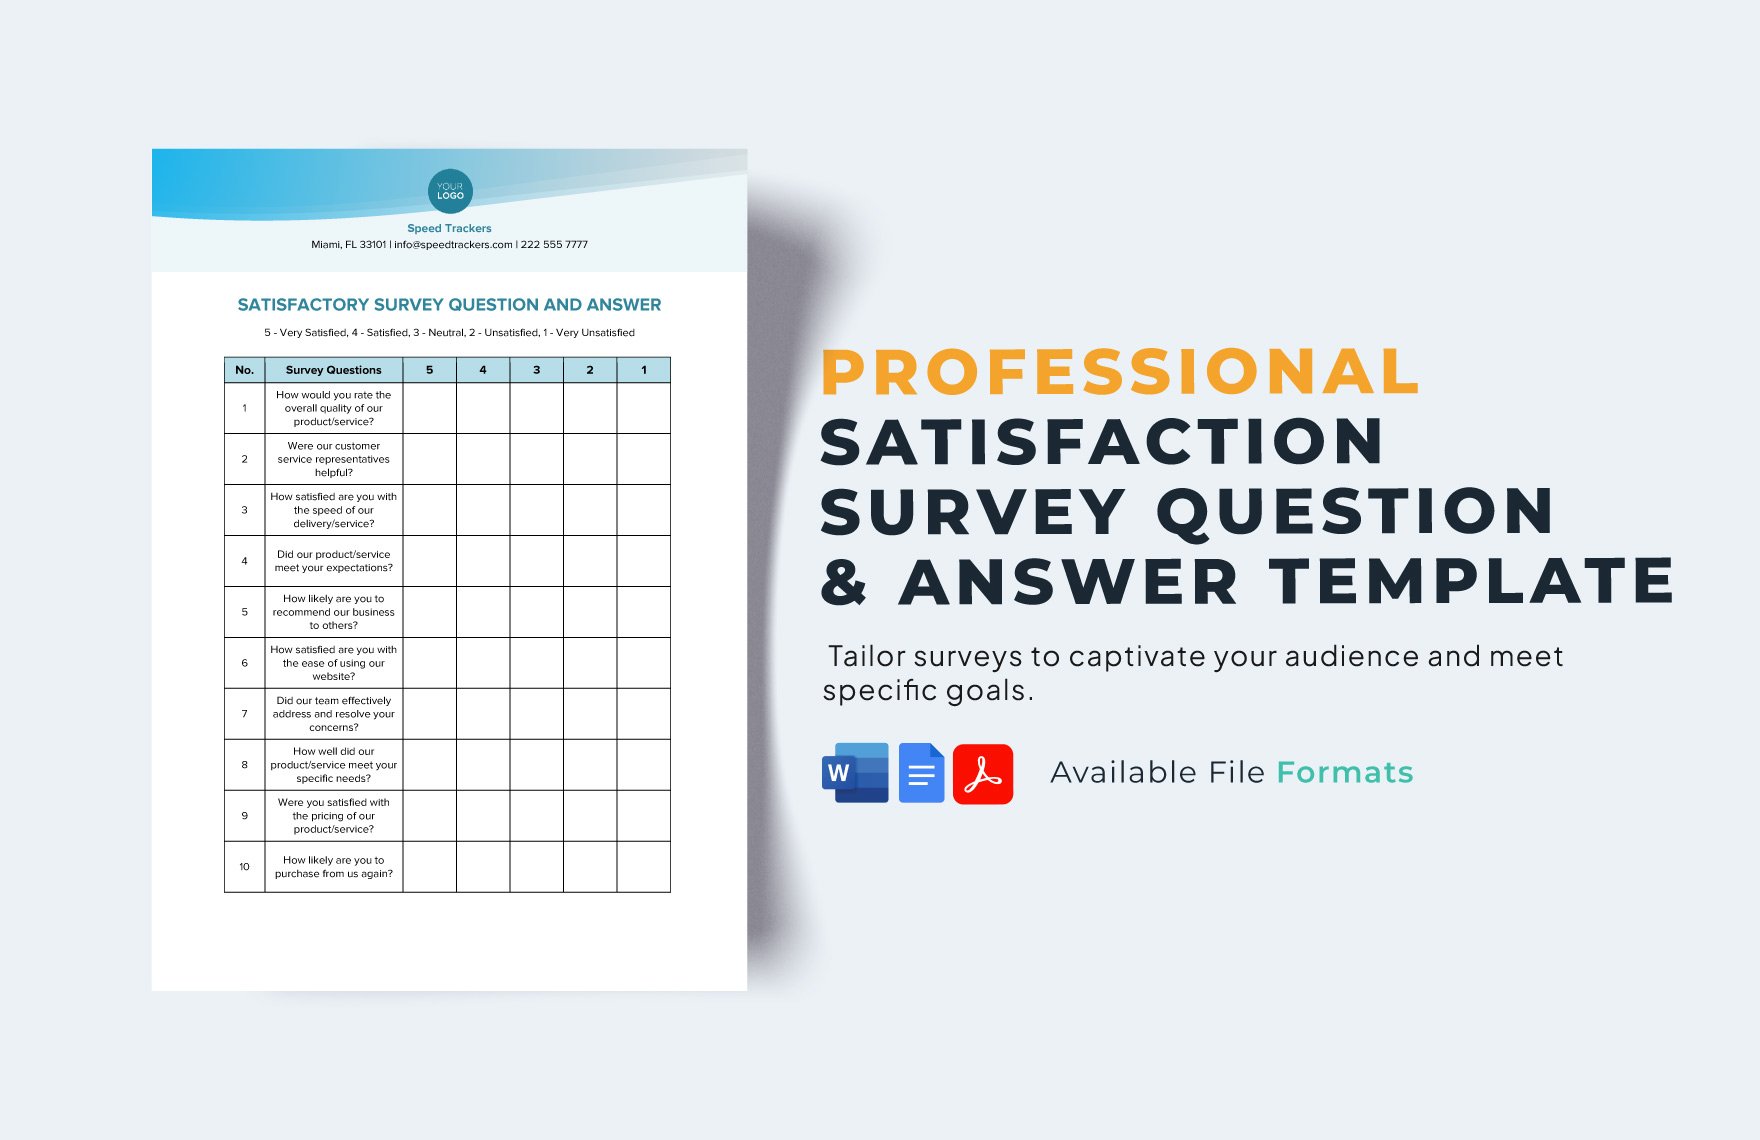 Free Satisfaction Survey Question & Answer Template in Word, Google Docs, PDF